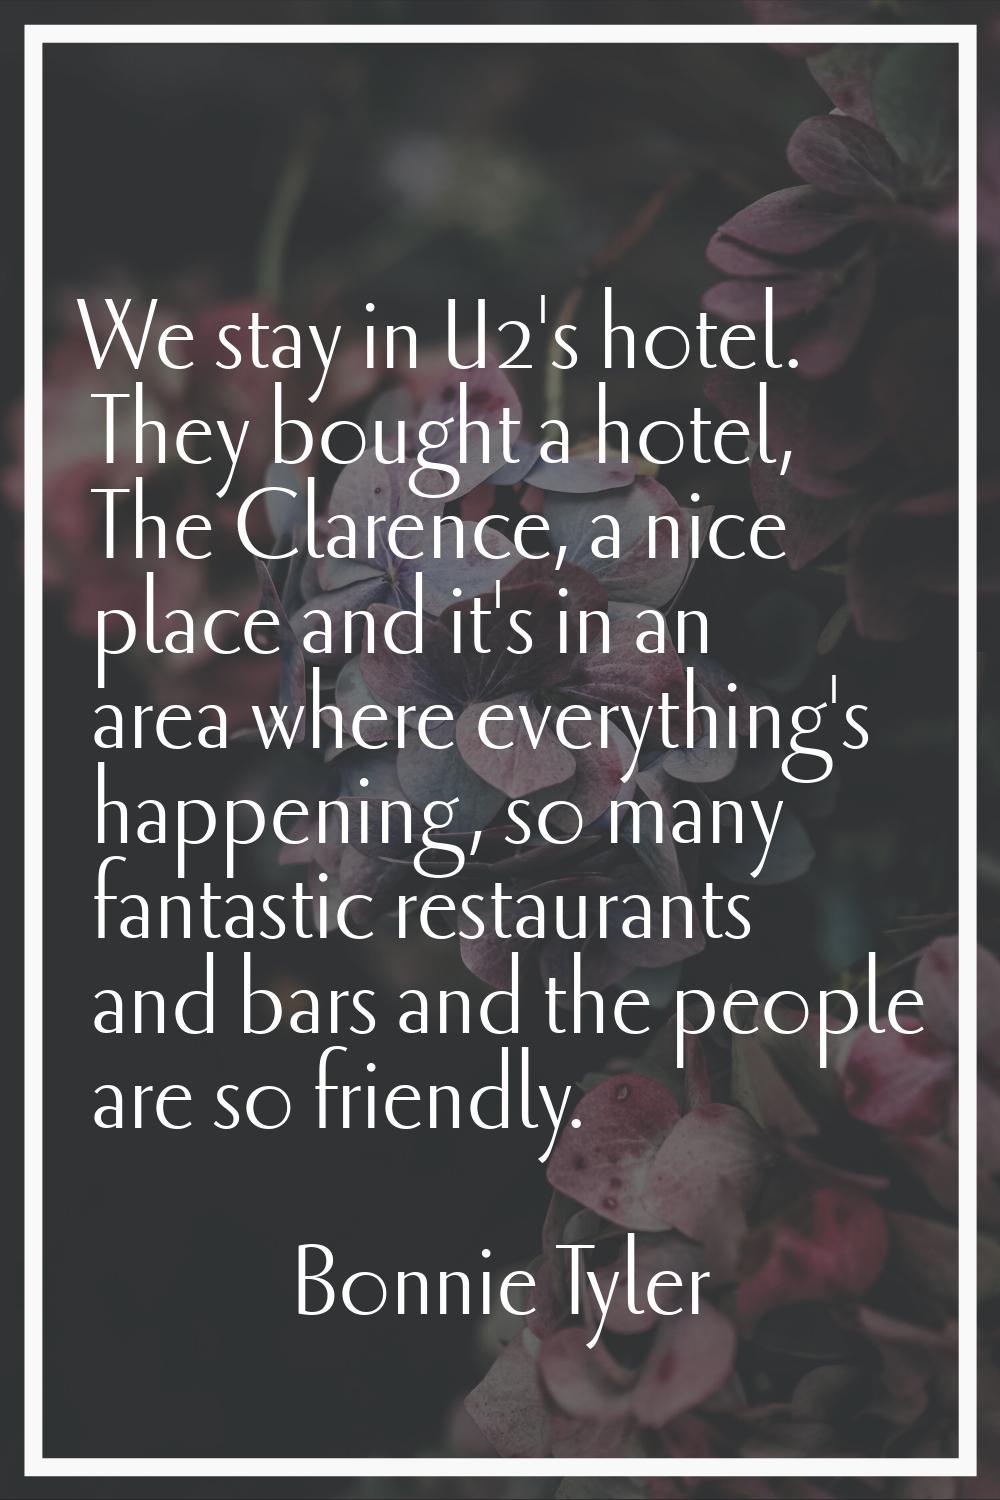 We stay in U2's hotel. They bought a hotel, The Clarence, a nice place and it's in an area where ev